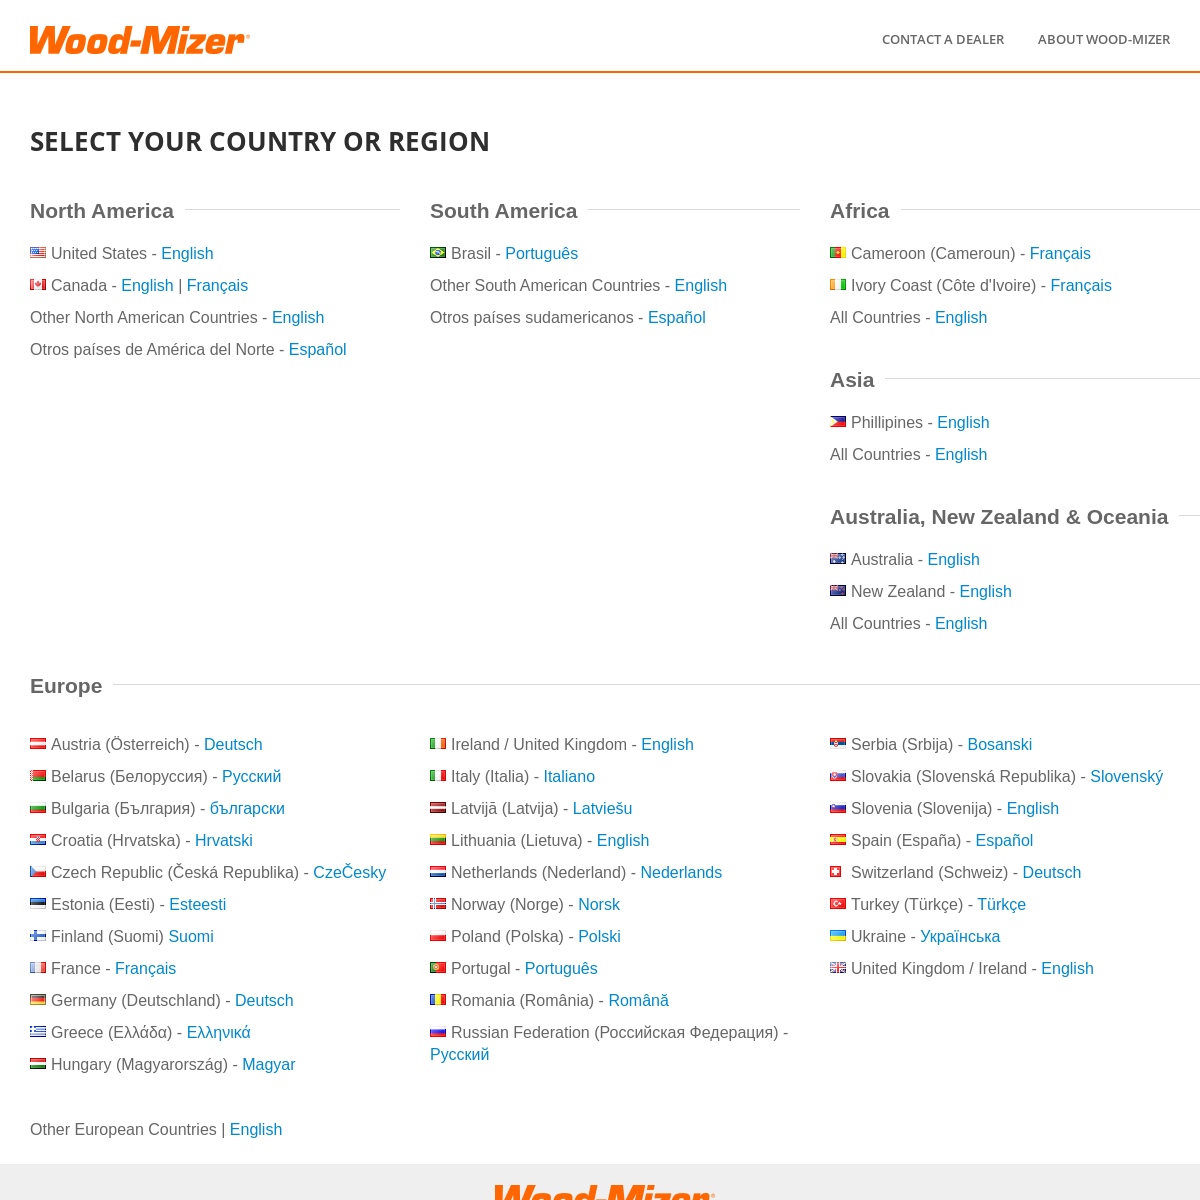 A complete backup of woodmizer.com